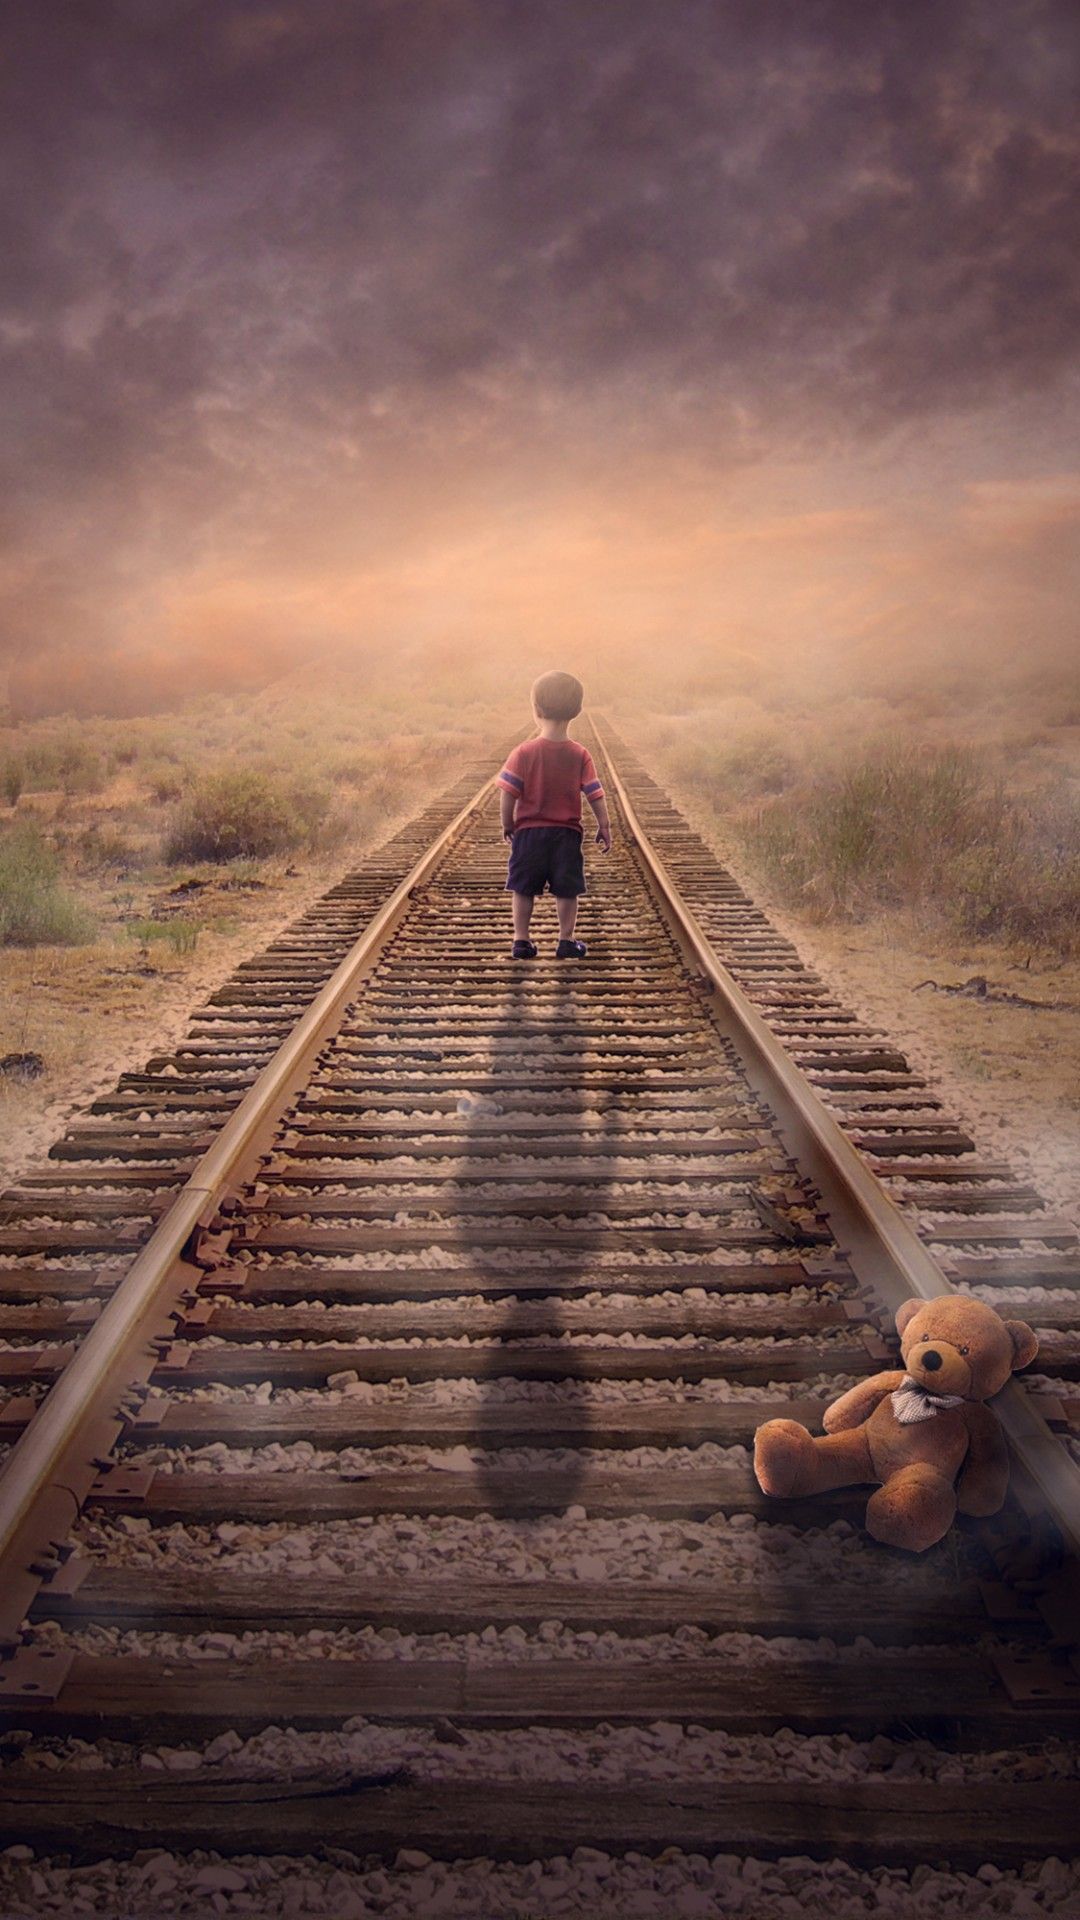 Children #Hope #wallpaper HD 4k background for android :)